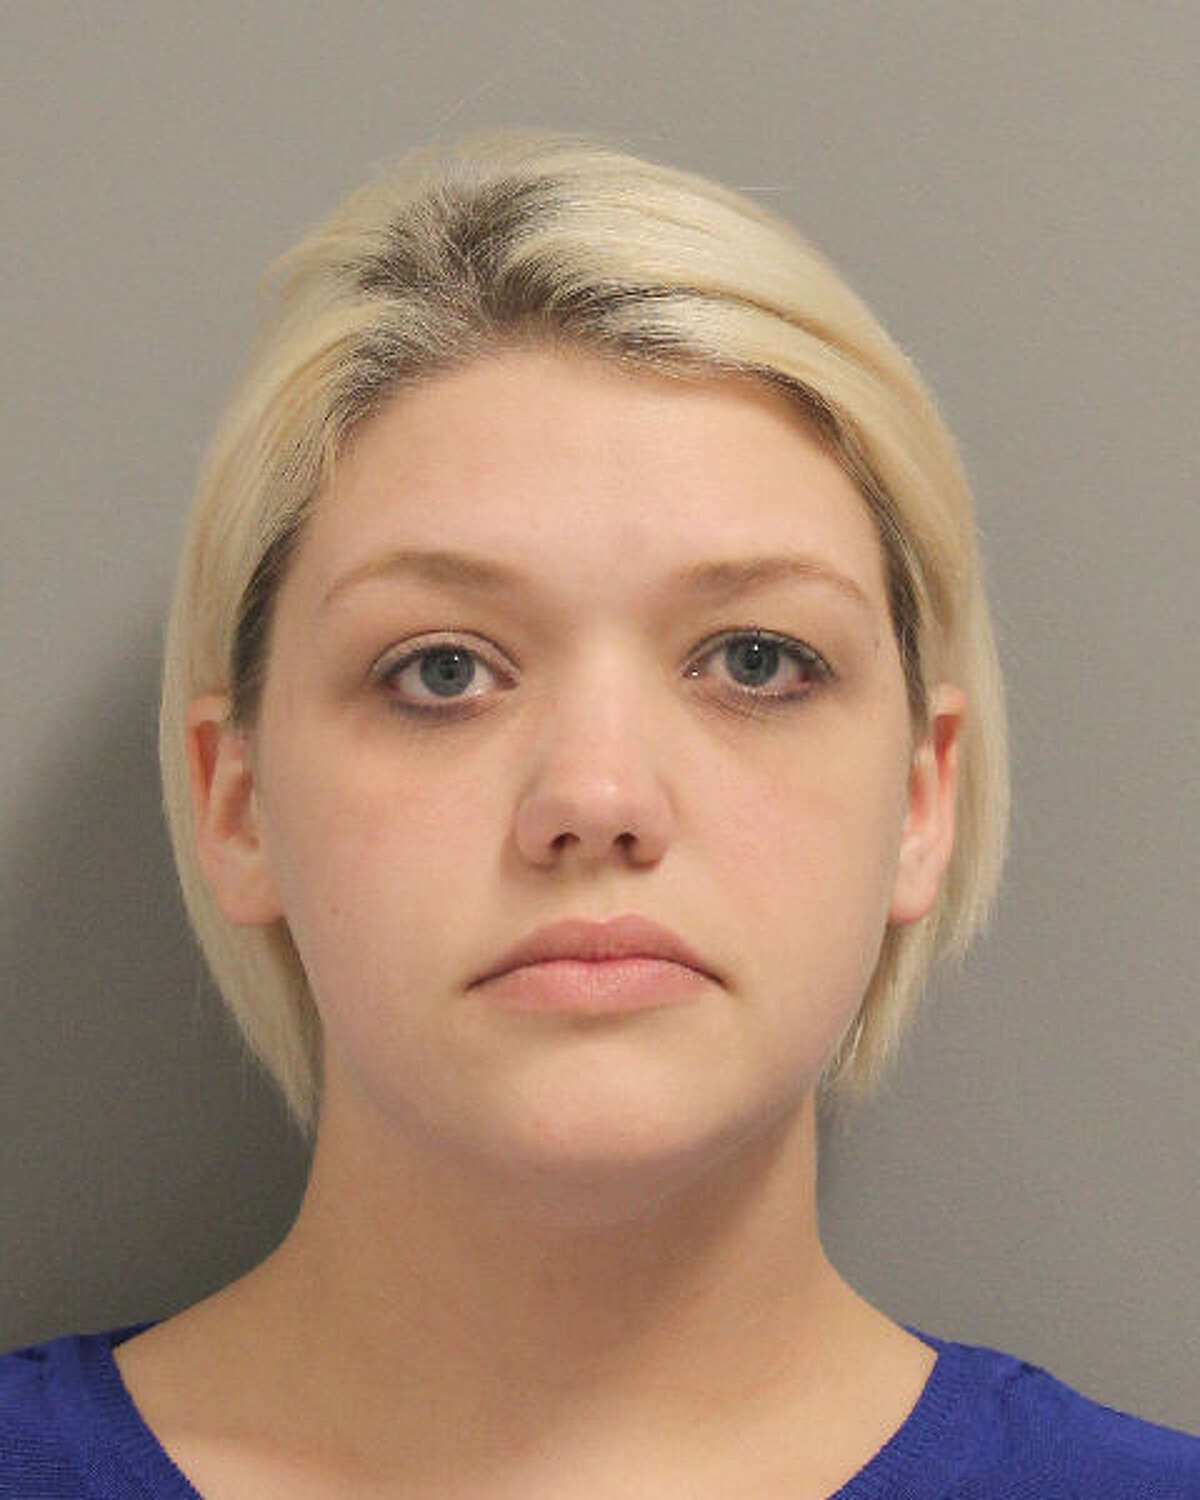 Kelsie Koepke has been arrested and charged with improper relationship with a student, a second-degree felony, and solicitation of a minor. Koepke was a teacher at Paetow High School in Katy ISD>